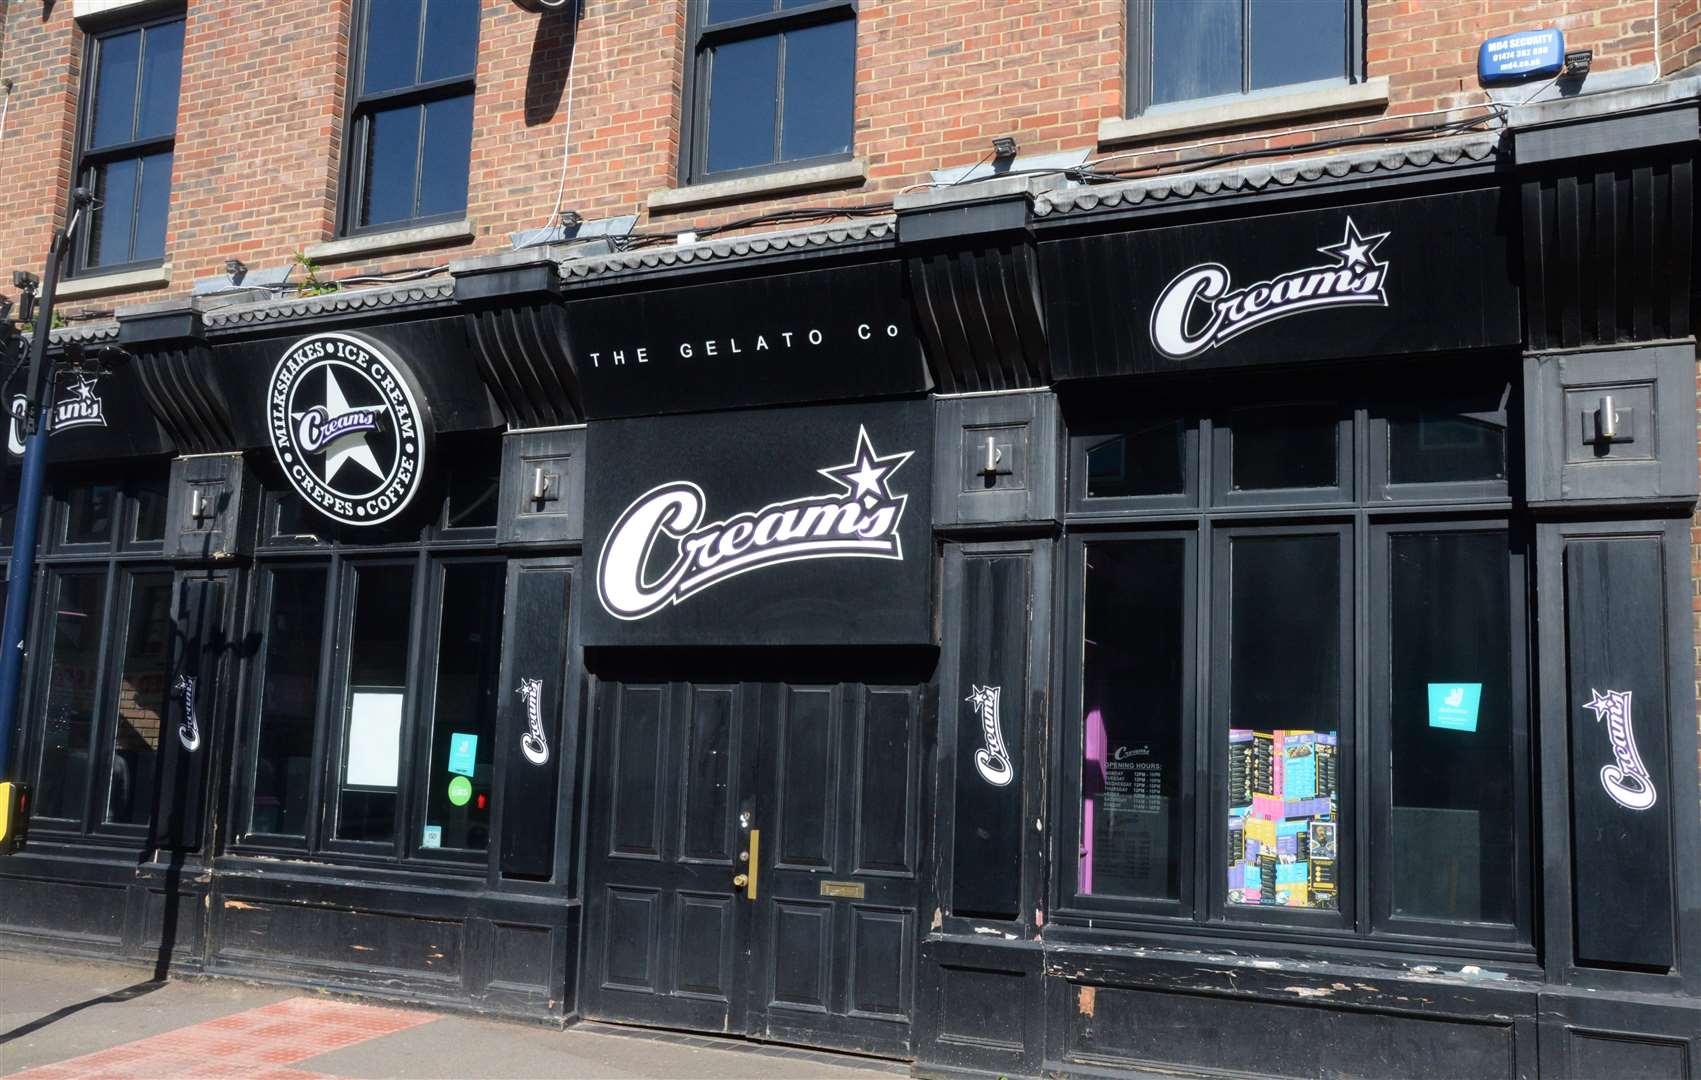 Creams in Maidstone could be converted into a HMO